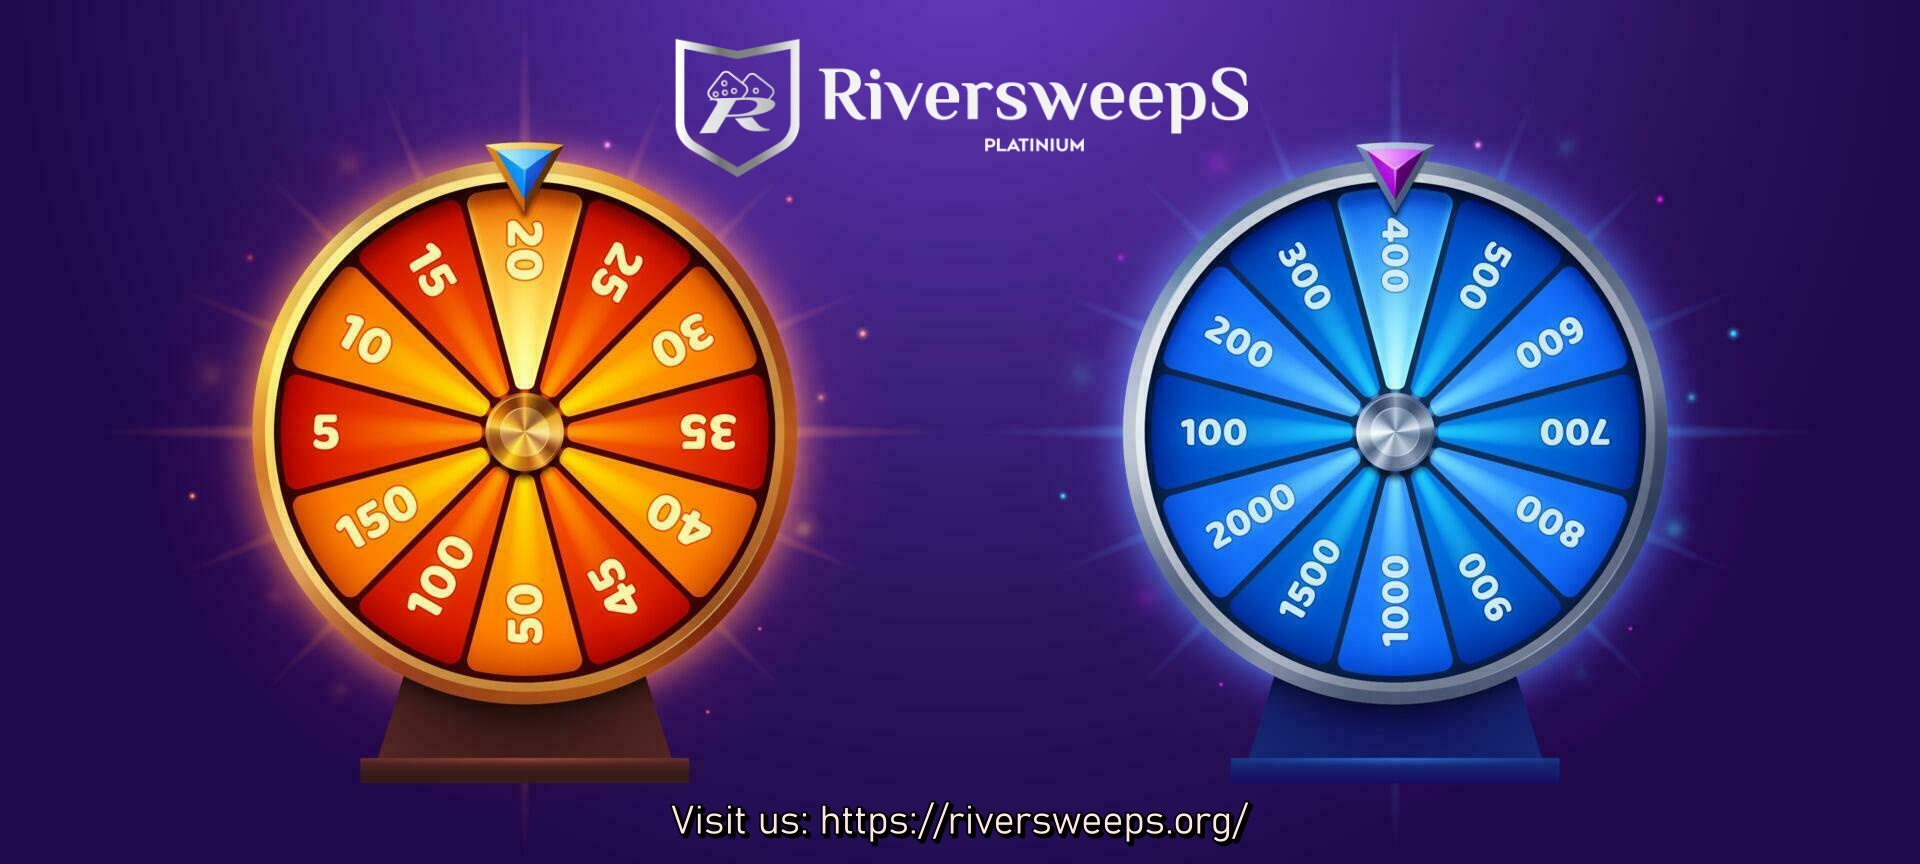 Riversweeps 777 Unveiled: Your Guide to Ultimate Casino Entertainment